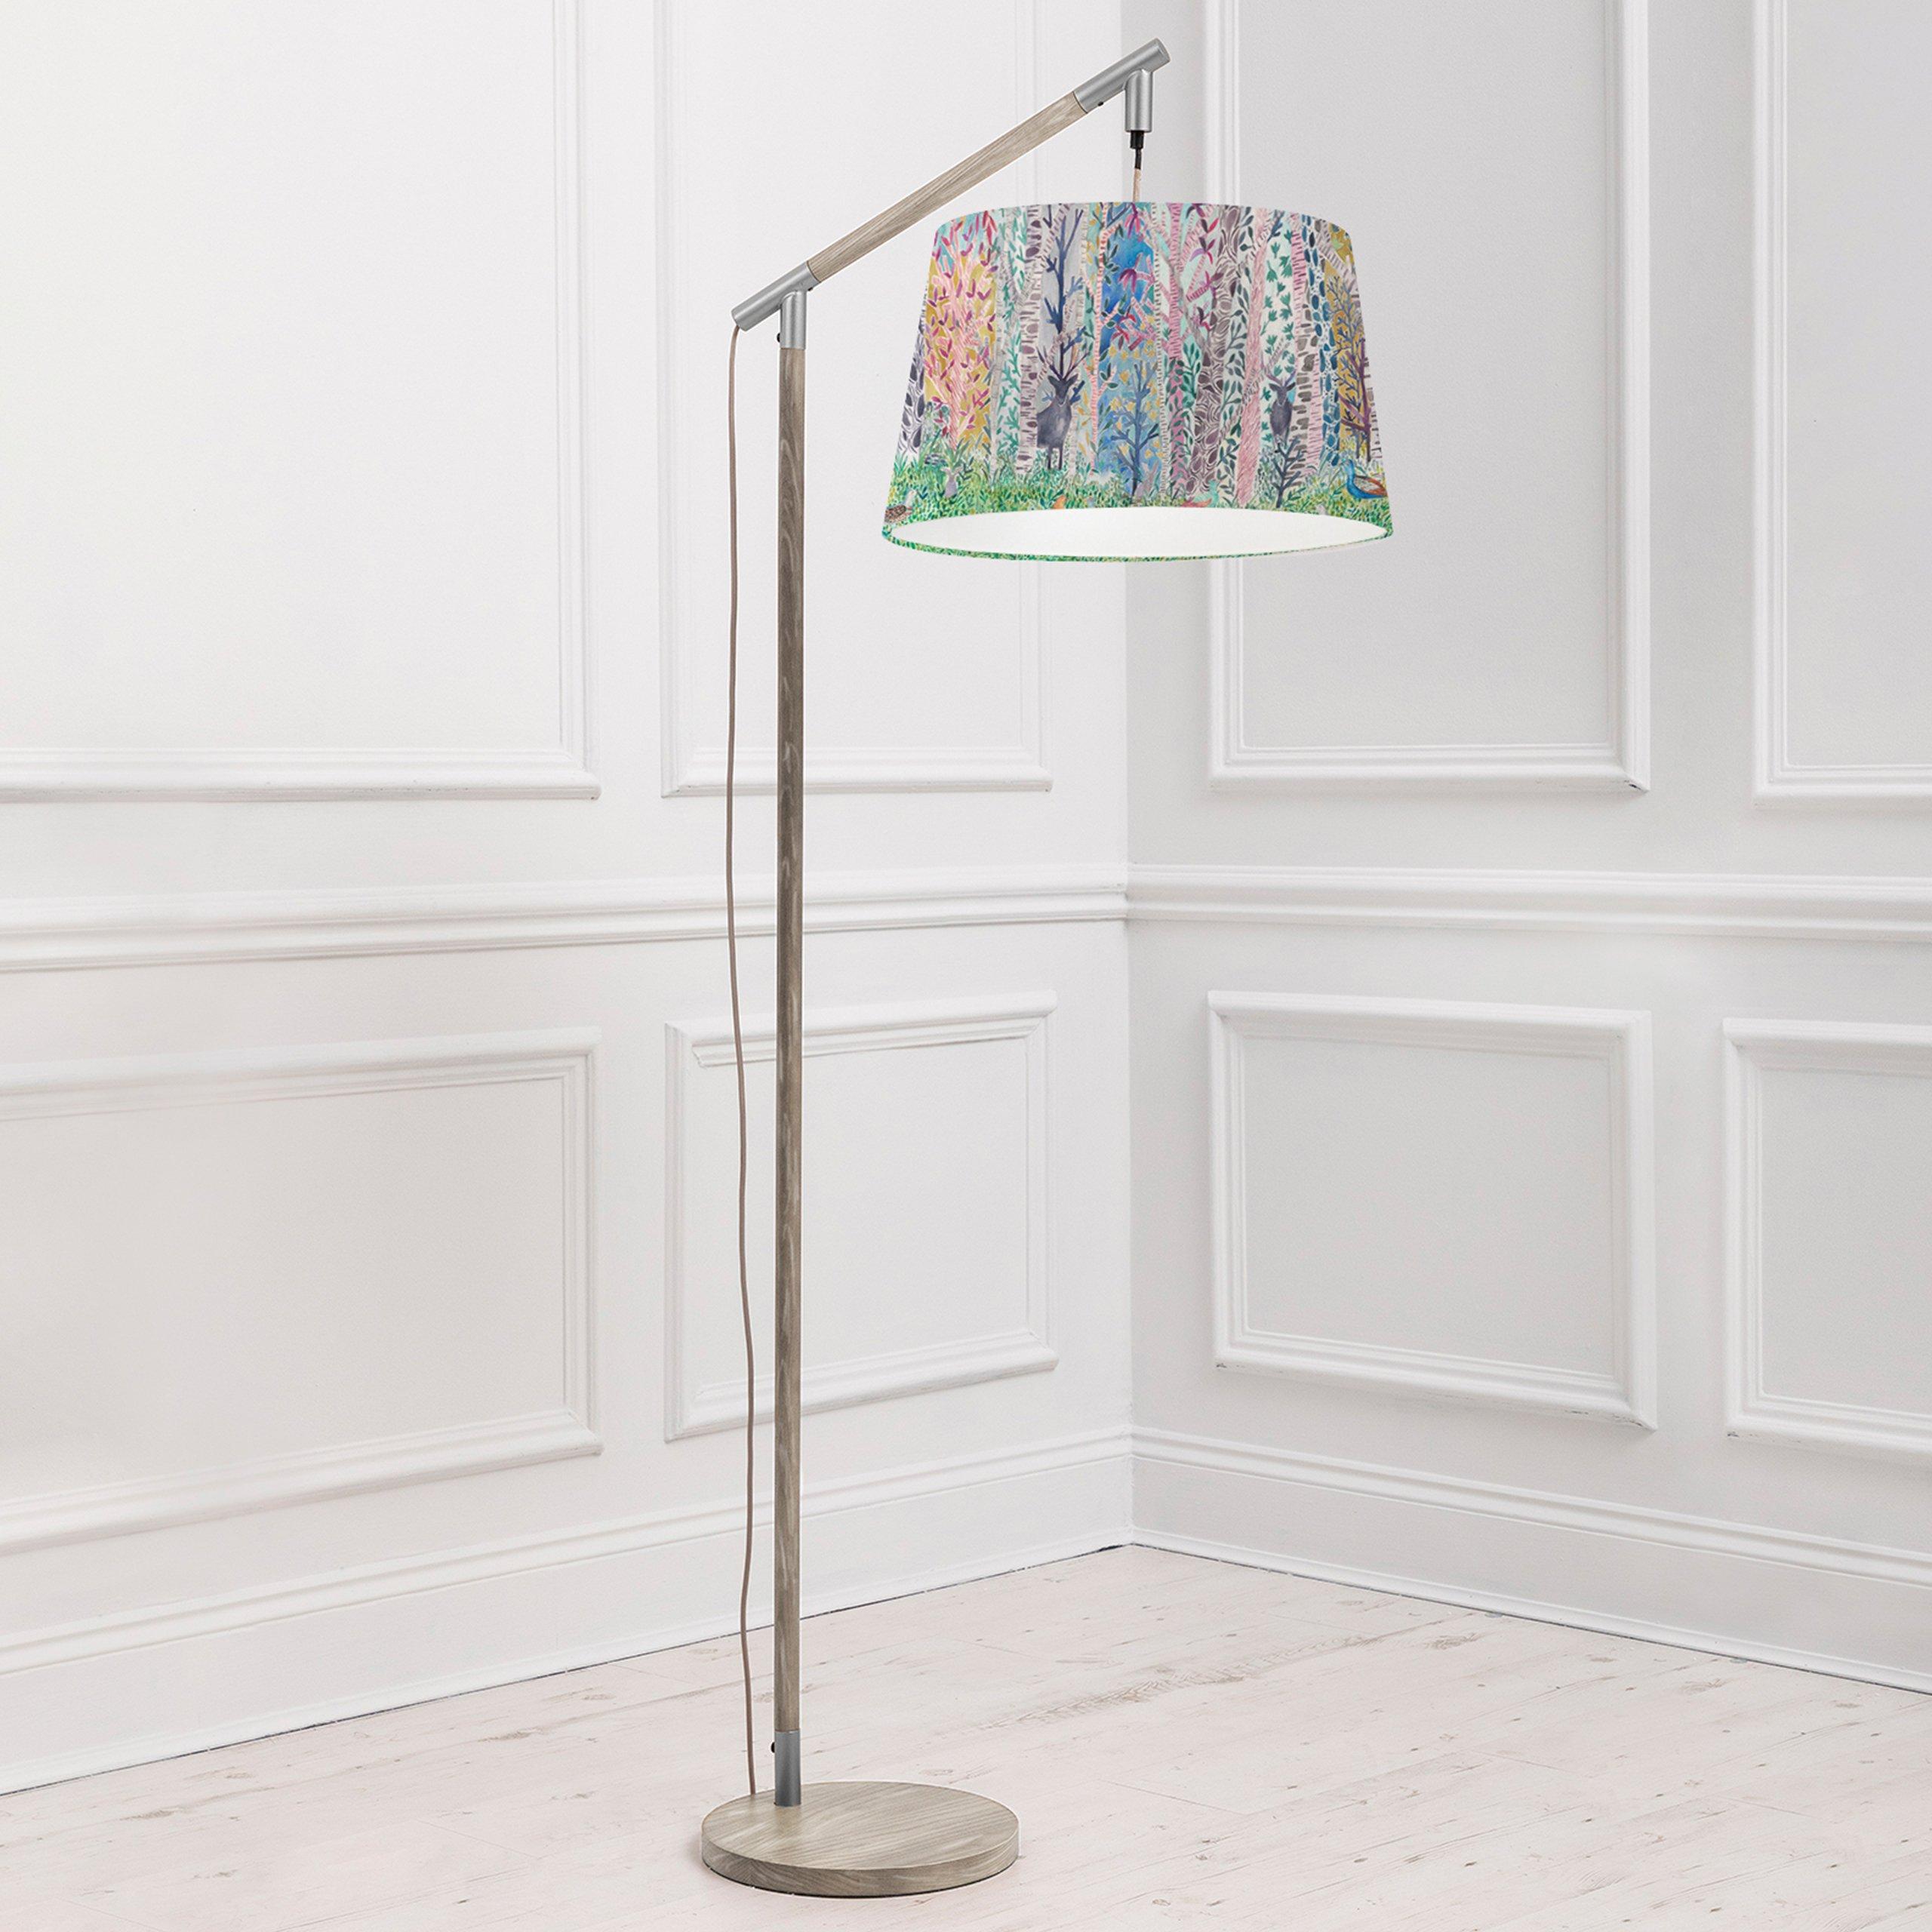 Photos - Floodlight / Street Light Quintus Floor Lamp With Whimsical Tale Quintus Taper Lampshade